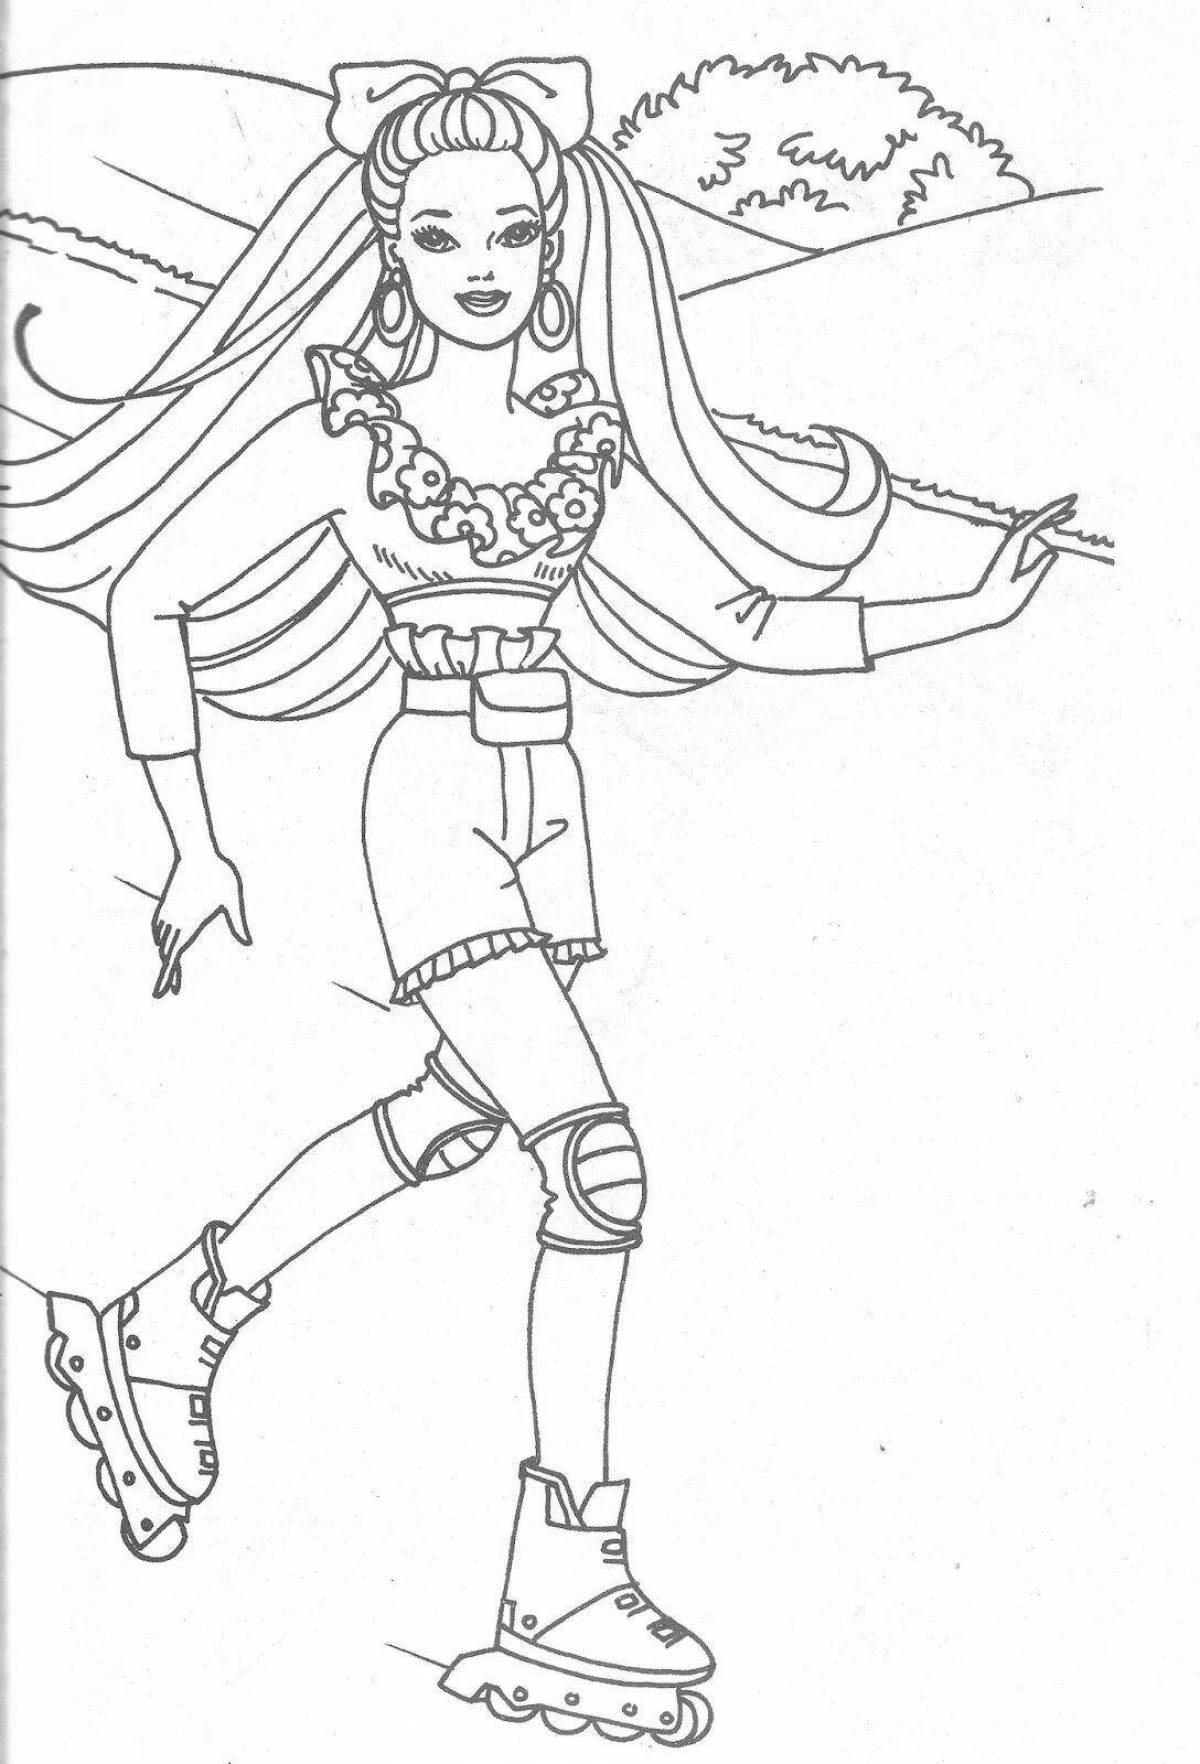 Funny 90s barbie coloring book